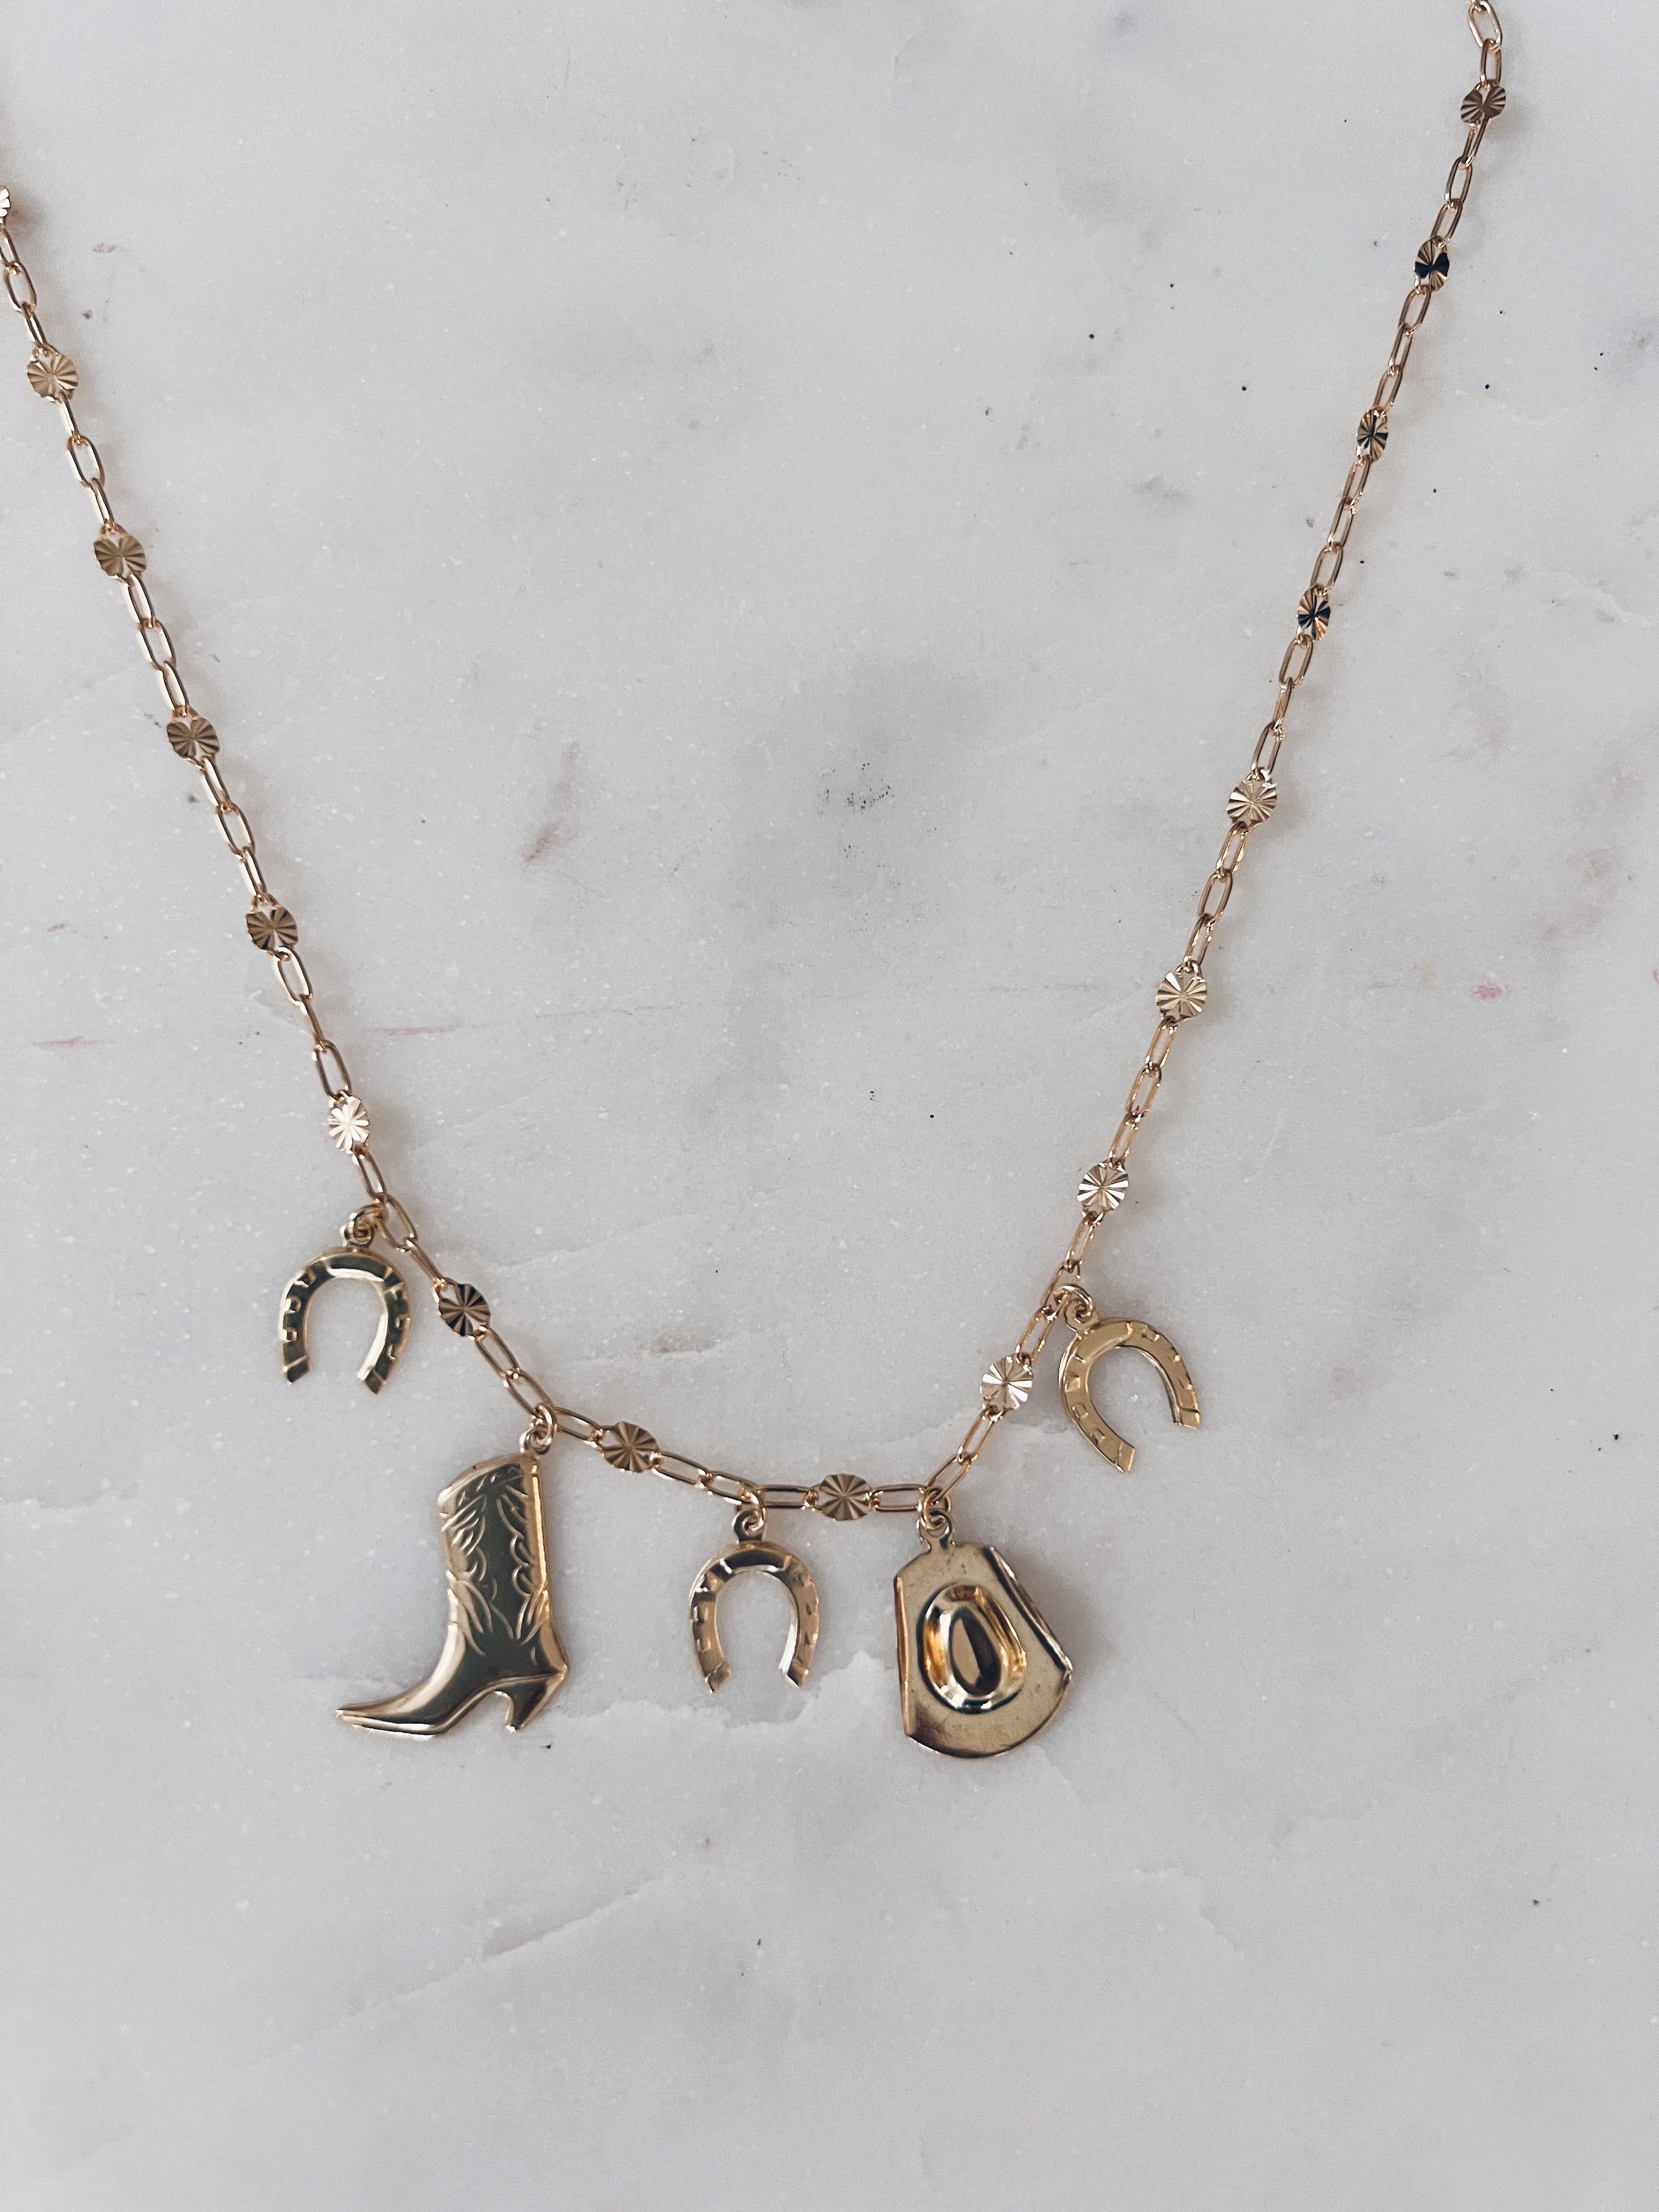 Hoedown Charm Necklace | Mac and Ry Jewelry